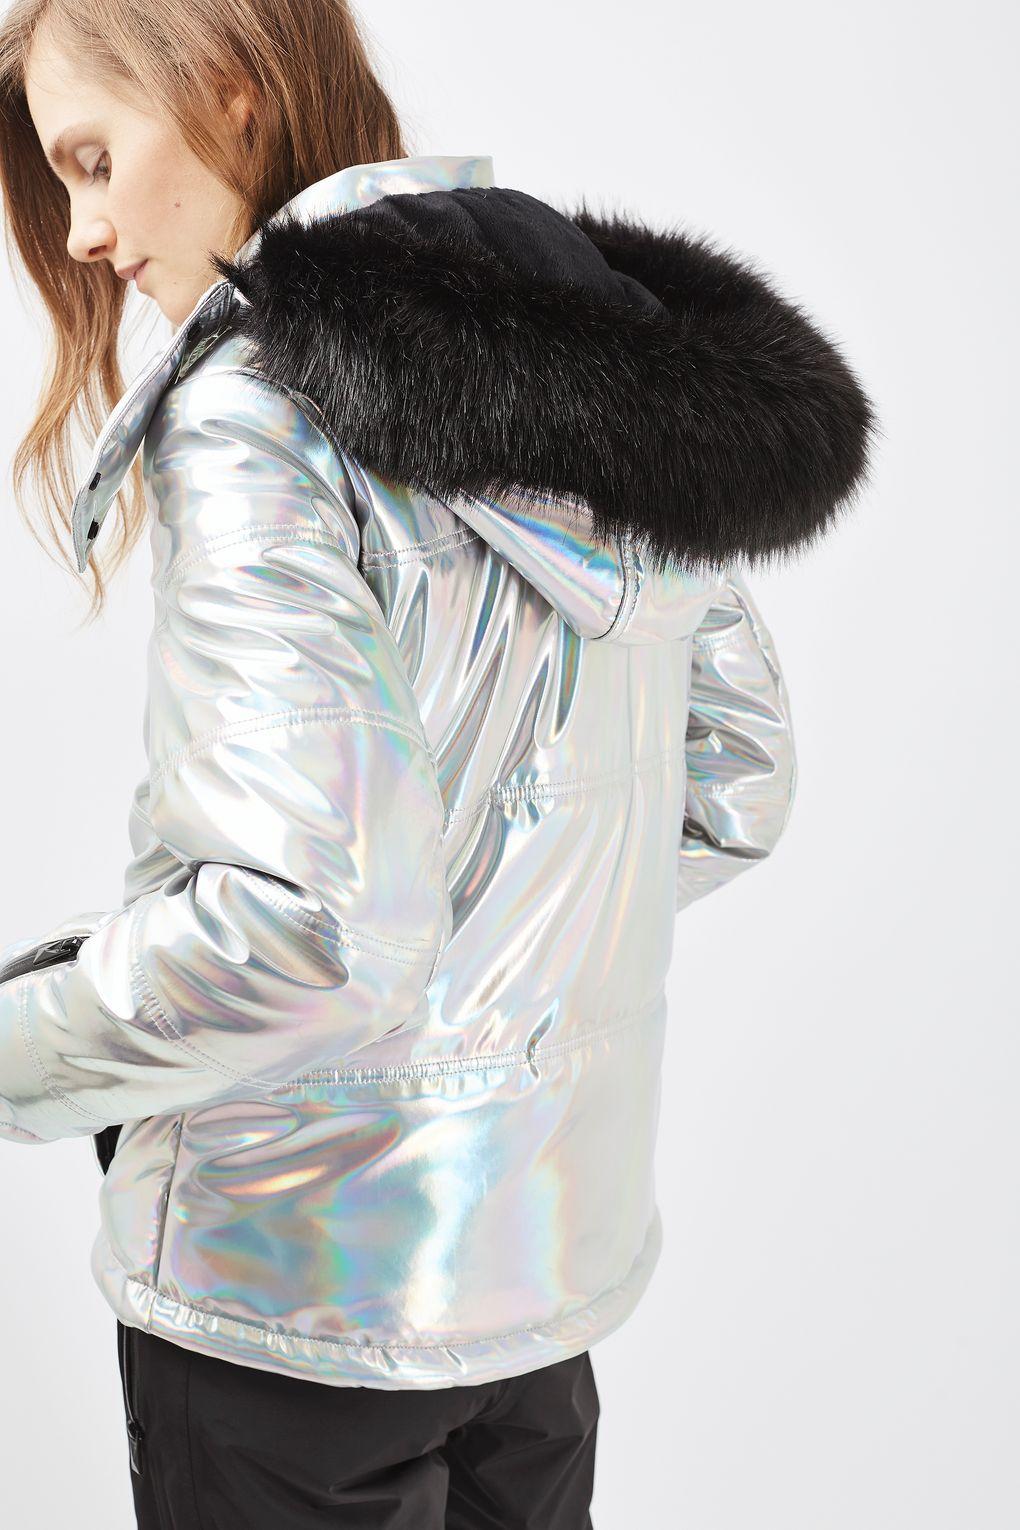 TOPSHOP Holographic Ski Jacket By Sno in Silver (Metallic) - Lyst